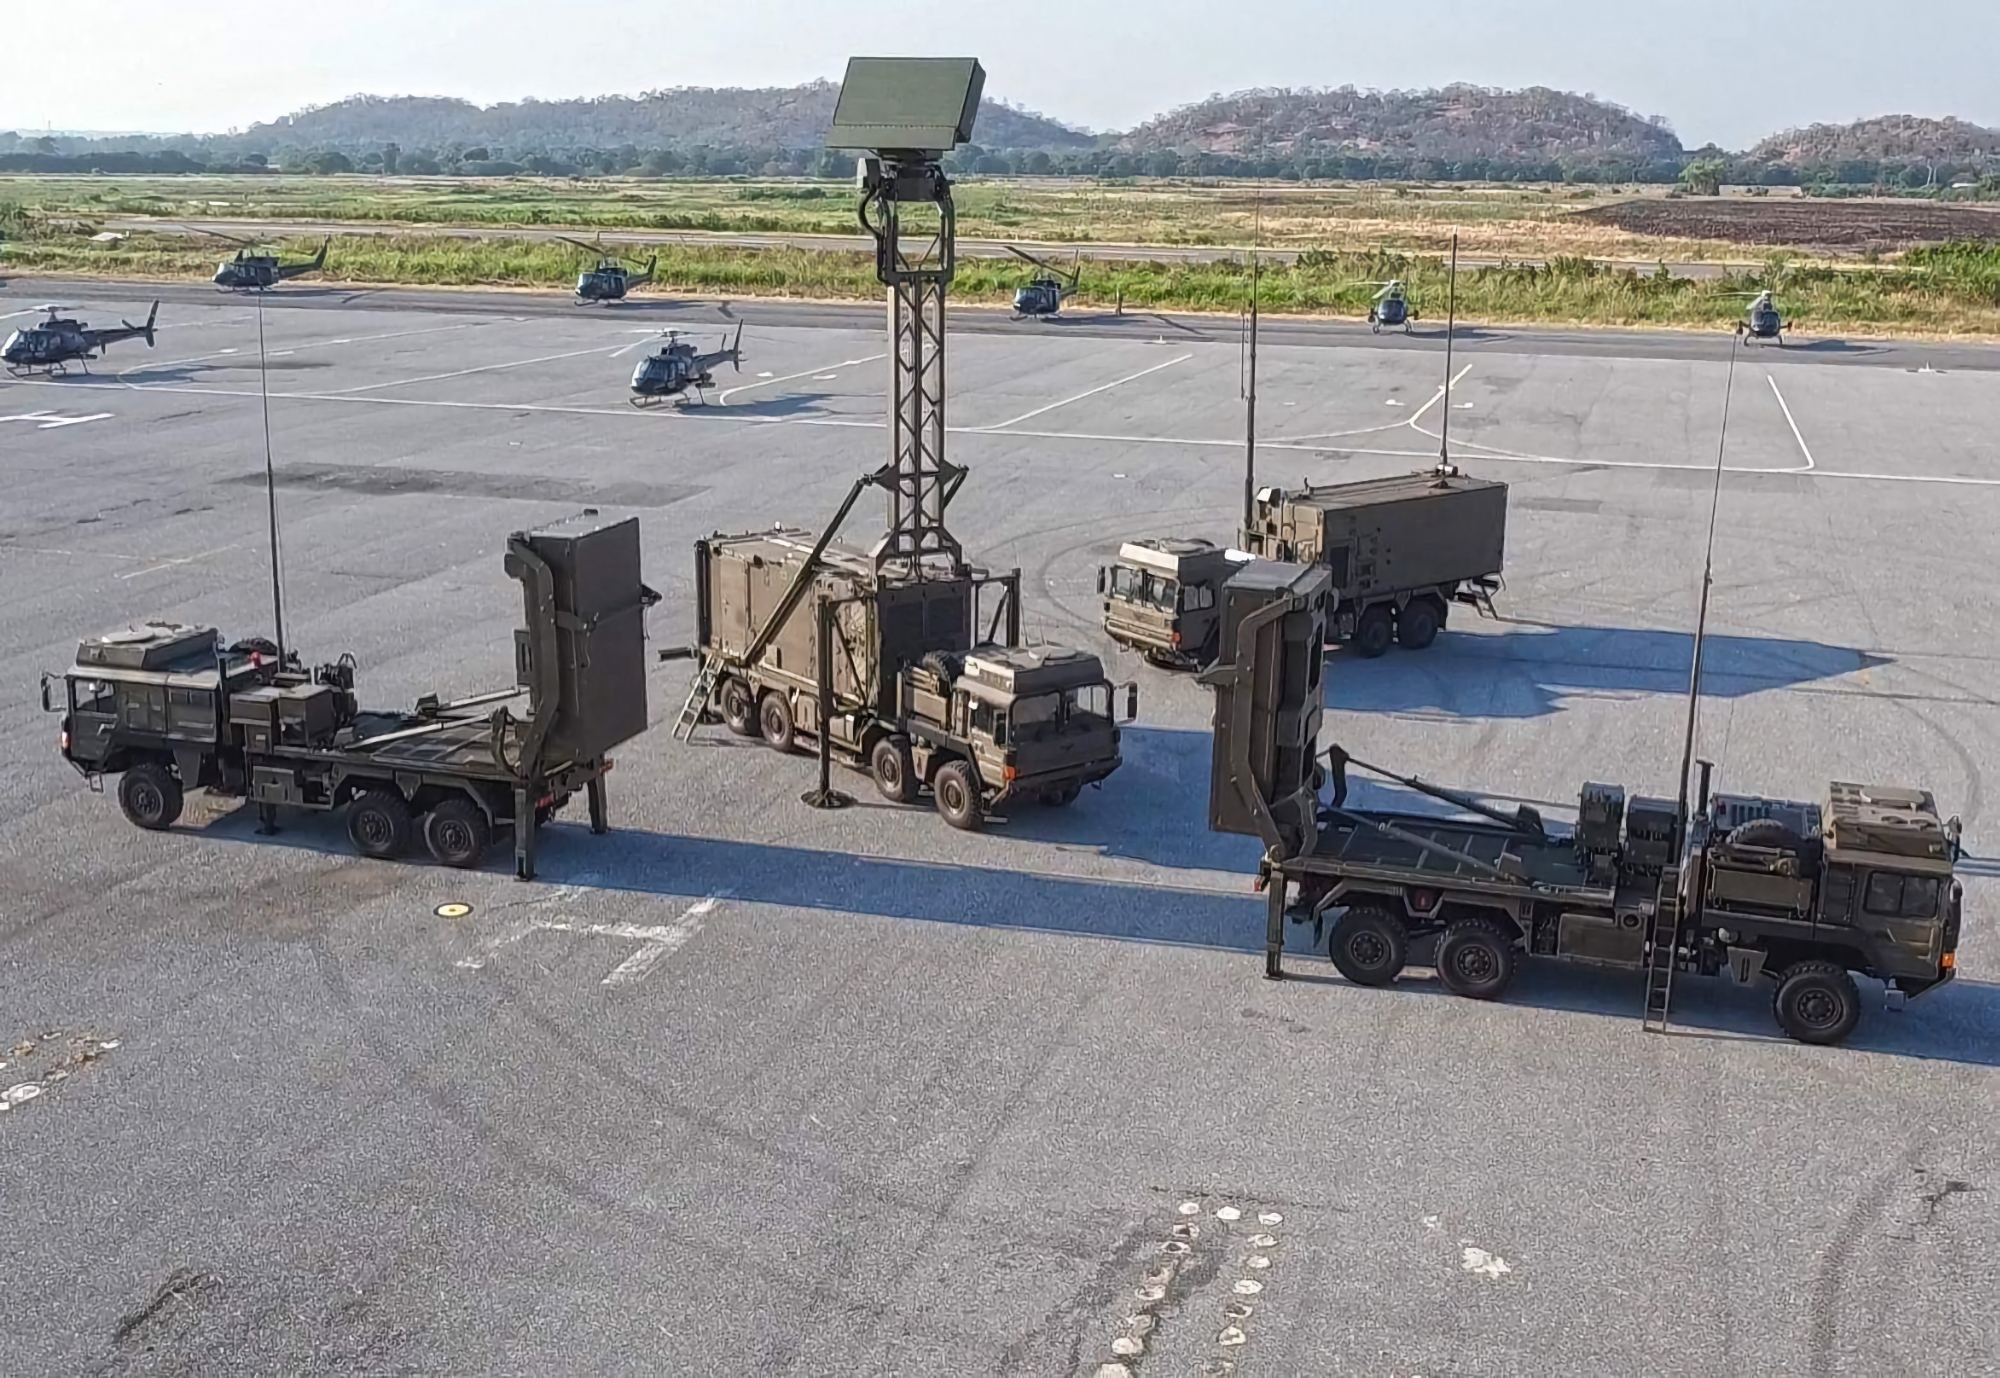 The French Army has received two batteries of VL-MICA surface-to-air missile defence systems.